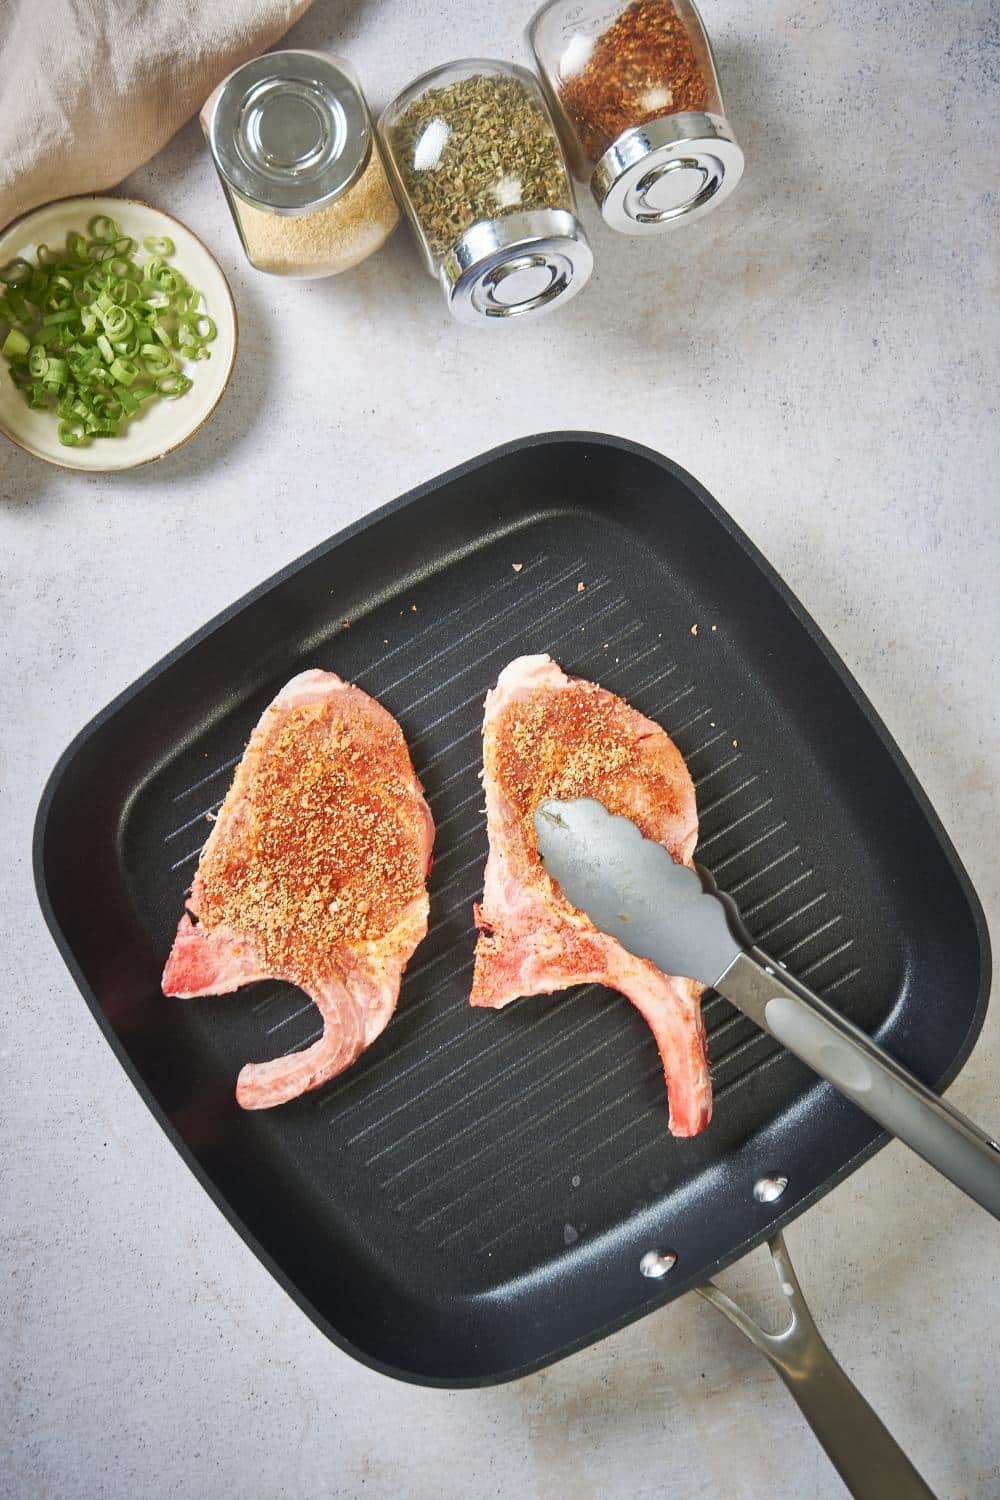 Two seasoned raw pork chops in a grill pan. One pork chop is being placed with metal tongs. Next to the pan are three spice jars of garlic powder, black pepper, and paprika, and a small plate of green onion garnish.